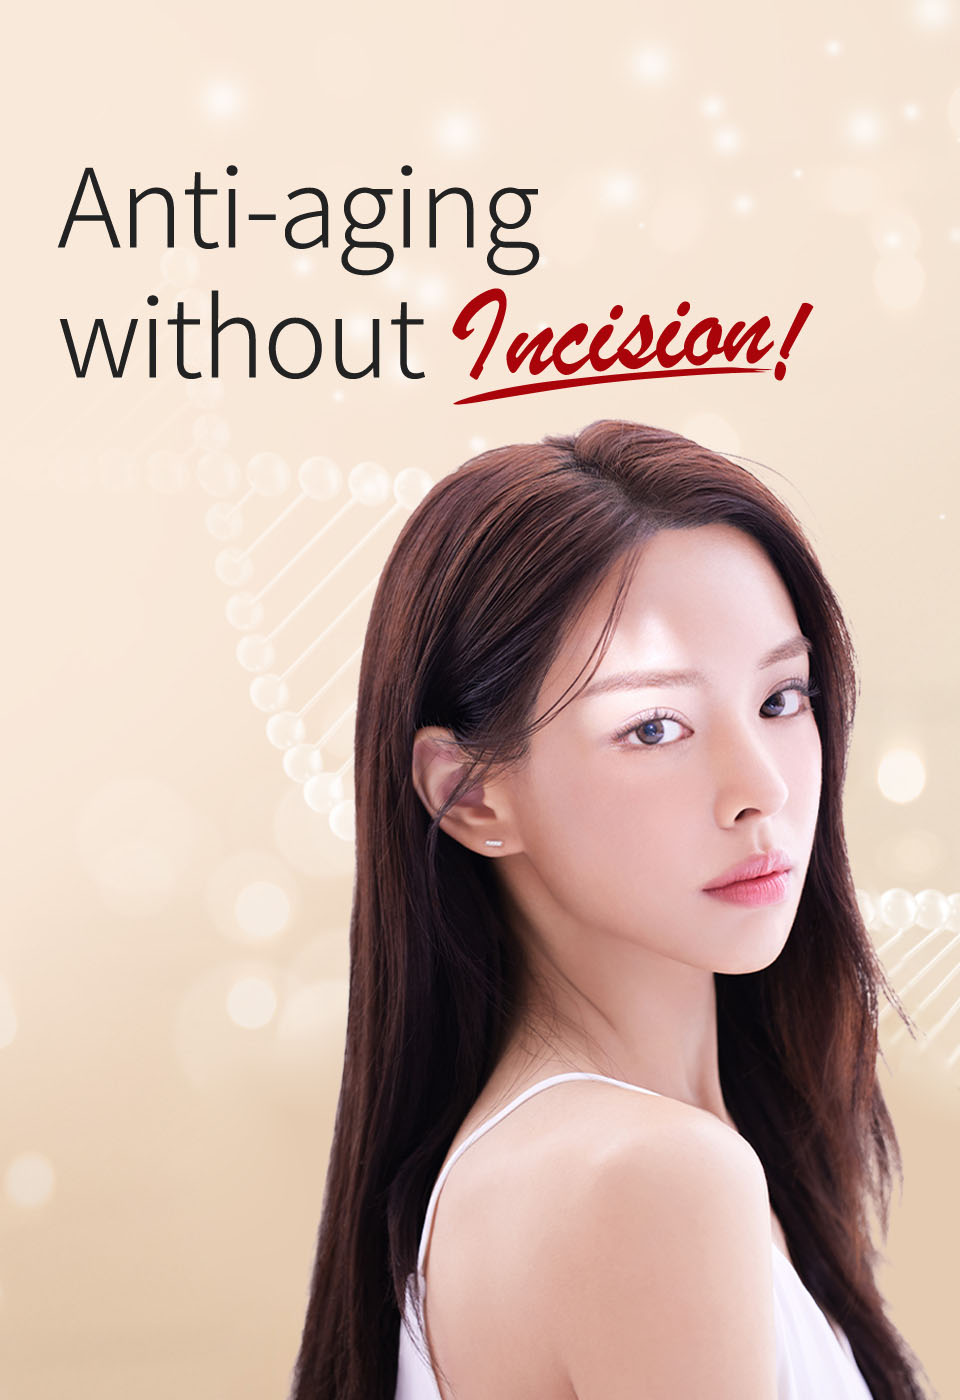 Anti-aging without incision!